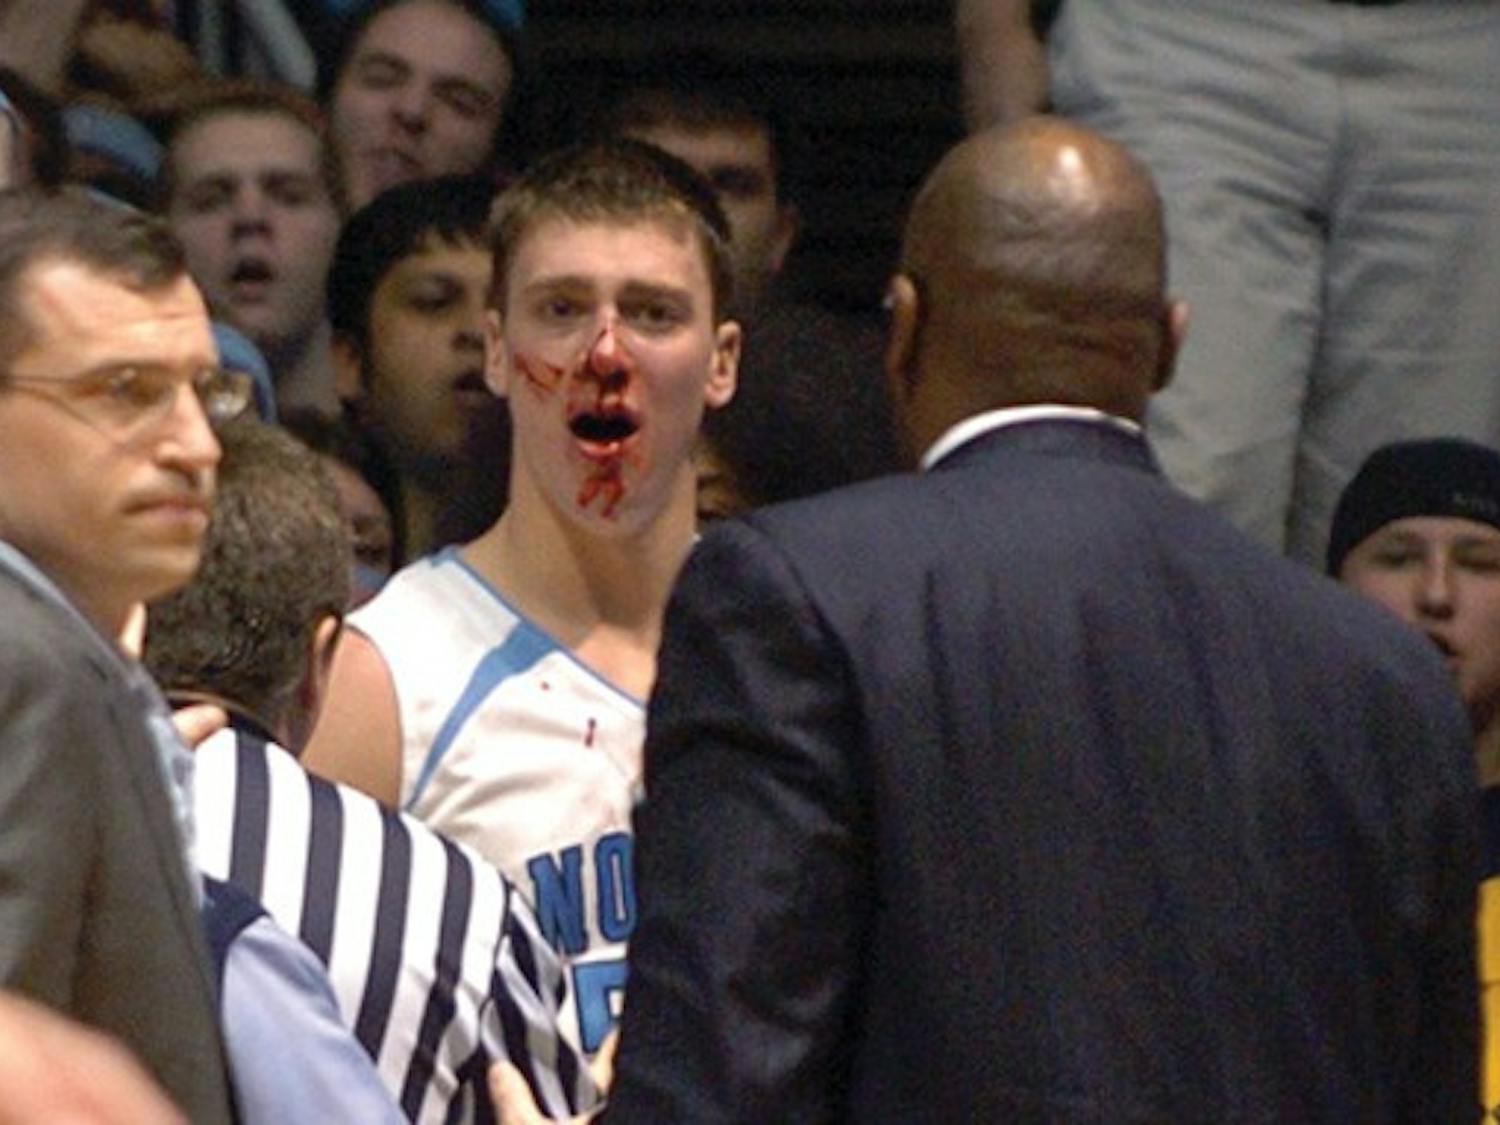 Gerald Henderson deserved an award for doing this to Tyler Hansbrough in 2007, Moore writes.